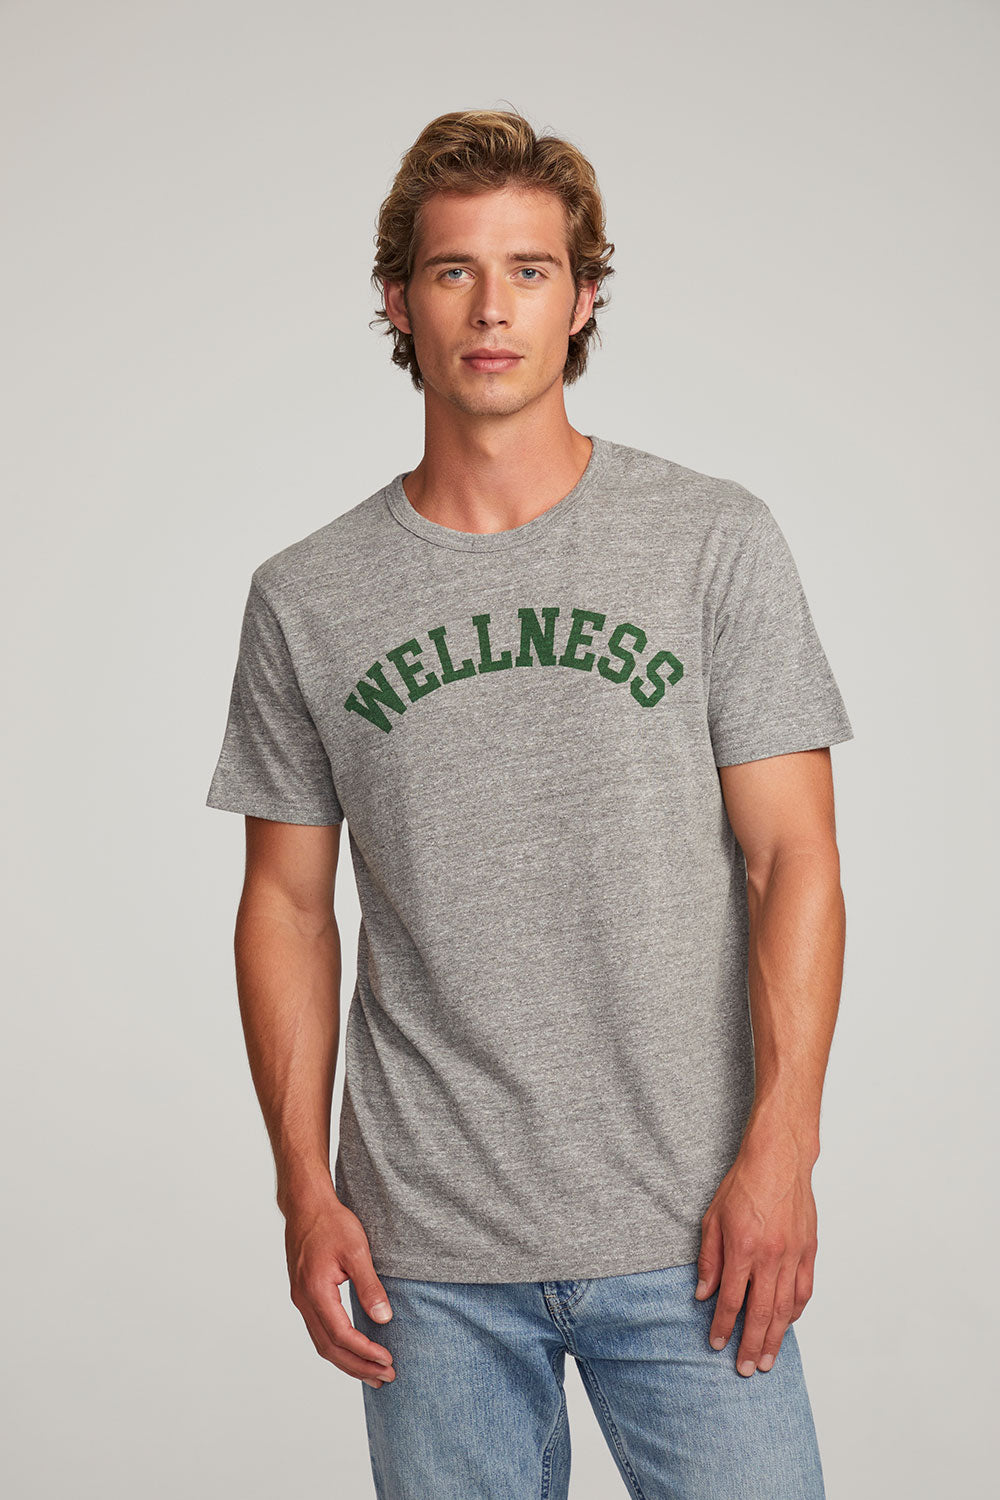 Wellness Mens Tee MENS chaserbrand